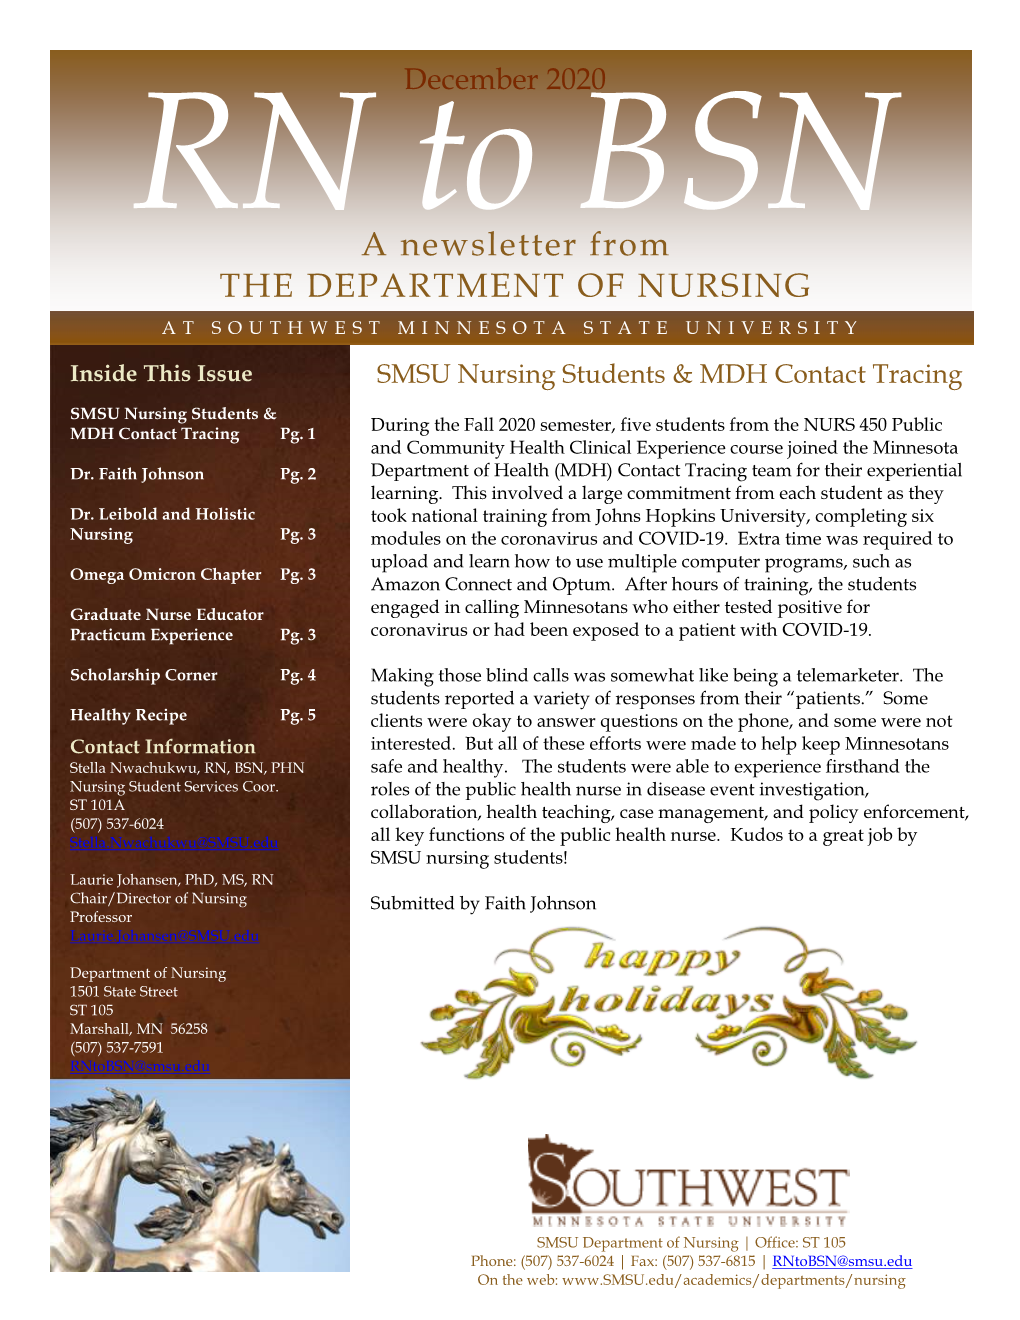 A Newsletter from the DEPARTMENT of NURSING at SOUTHWEST MINNESOTA STATE UNIVERSITY Inside This Issue SMSU Nursing Students & MDH Contact Tracing